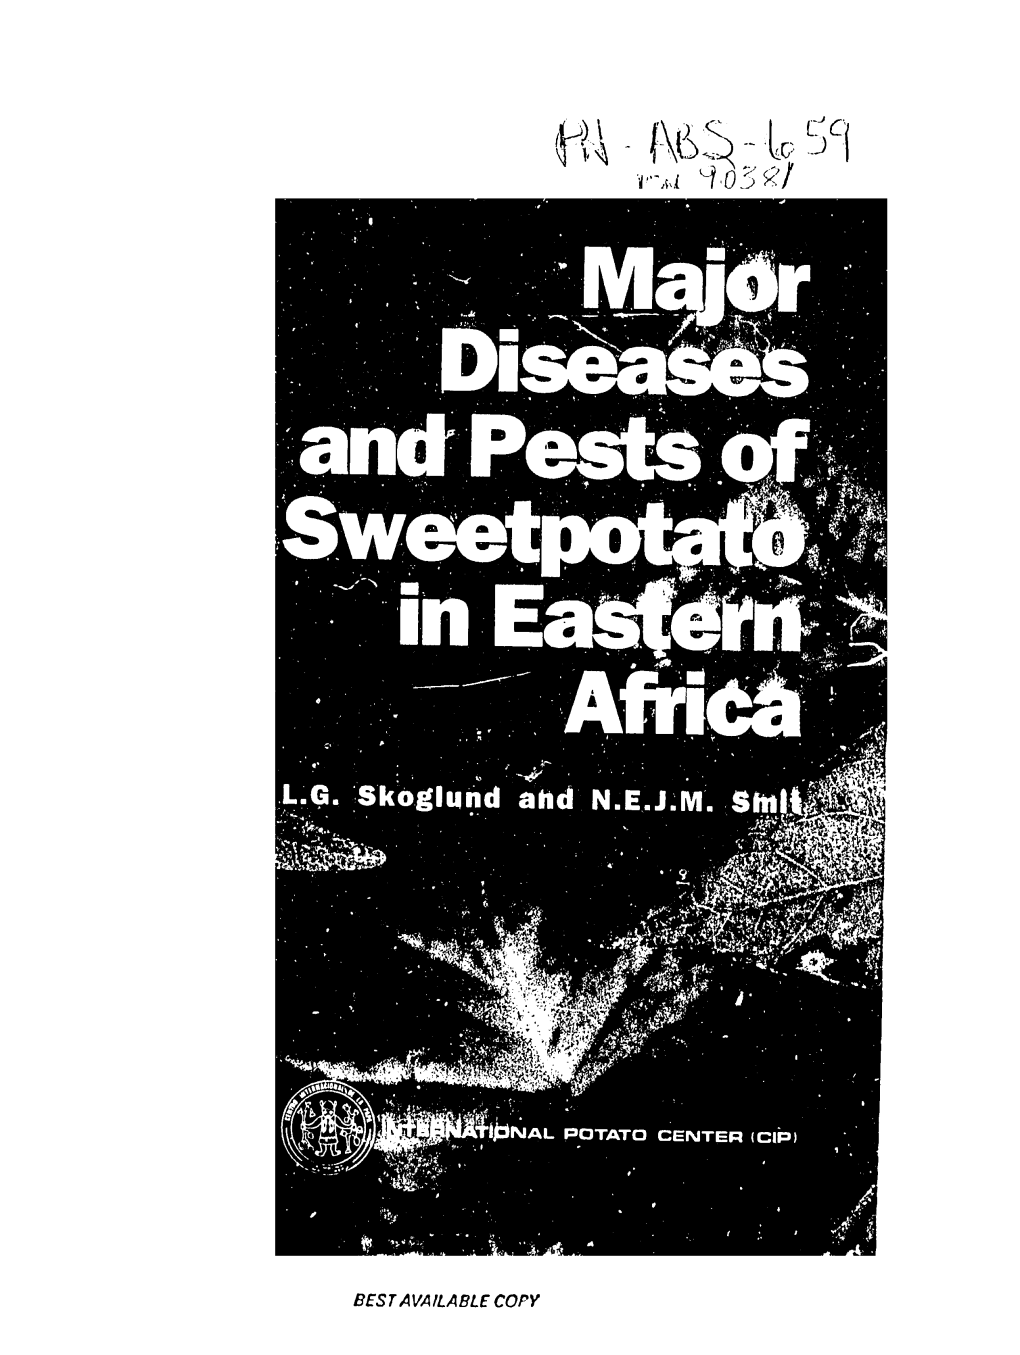 Major Diseases and Pests of Sweetpotato in Eastern Africa